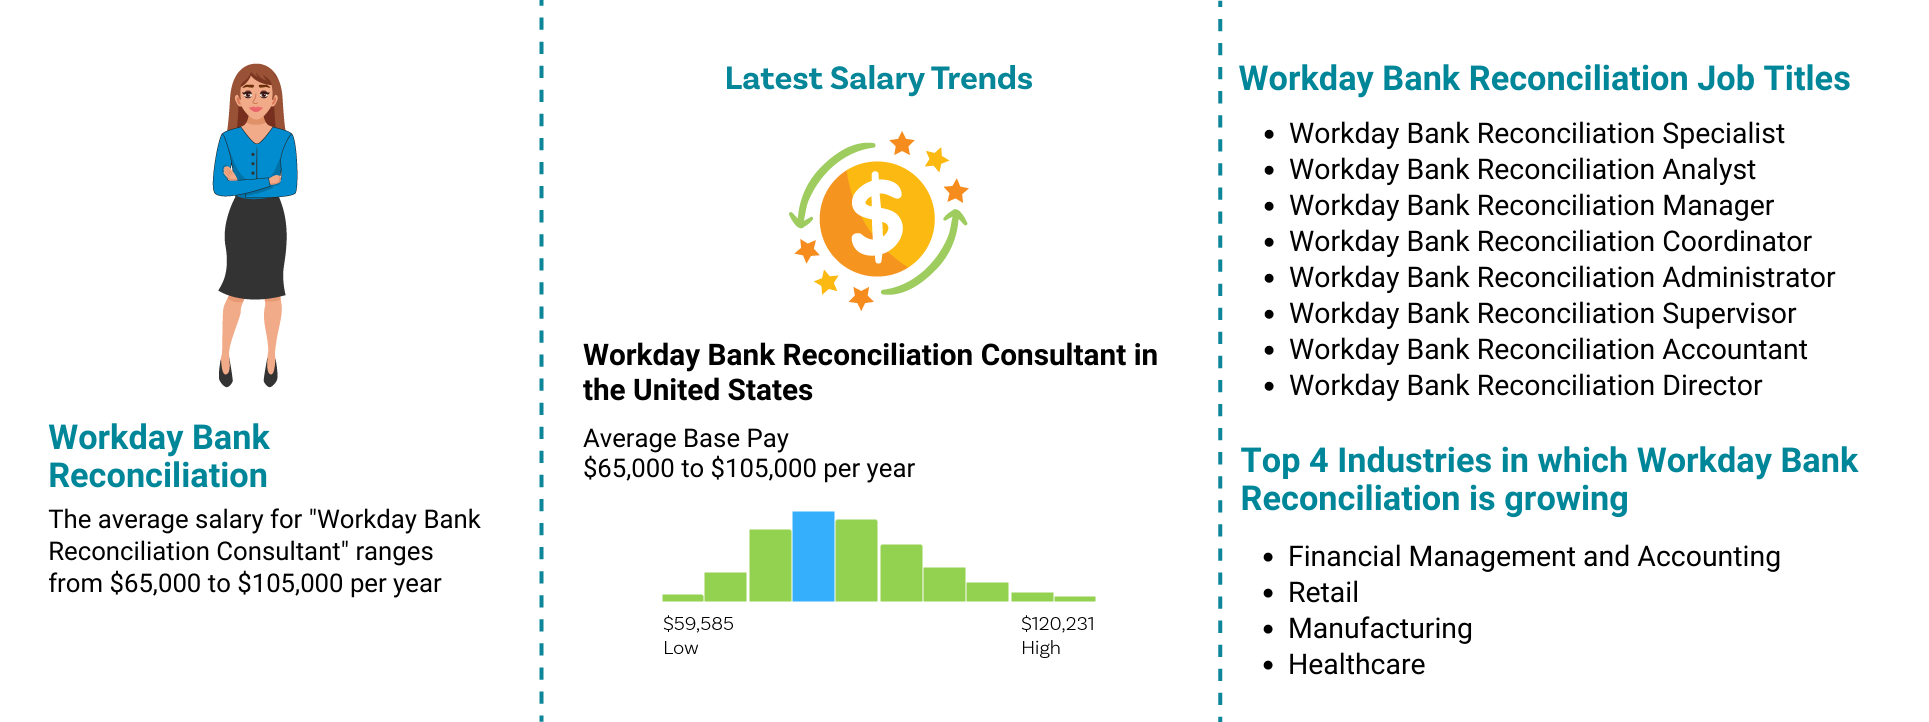 Workday Bank Reconciliation Job Outlook